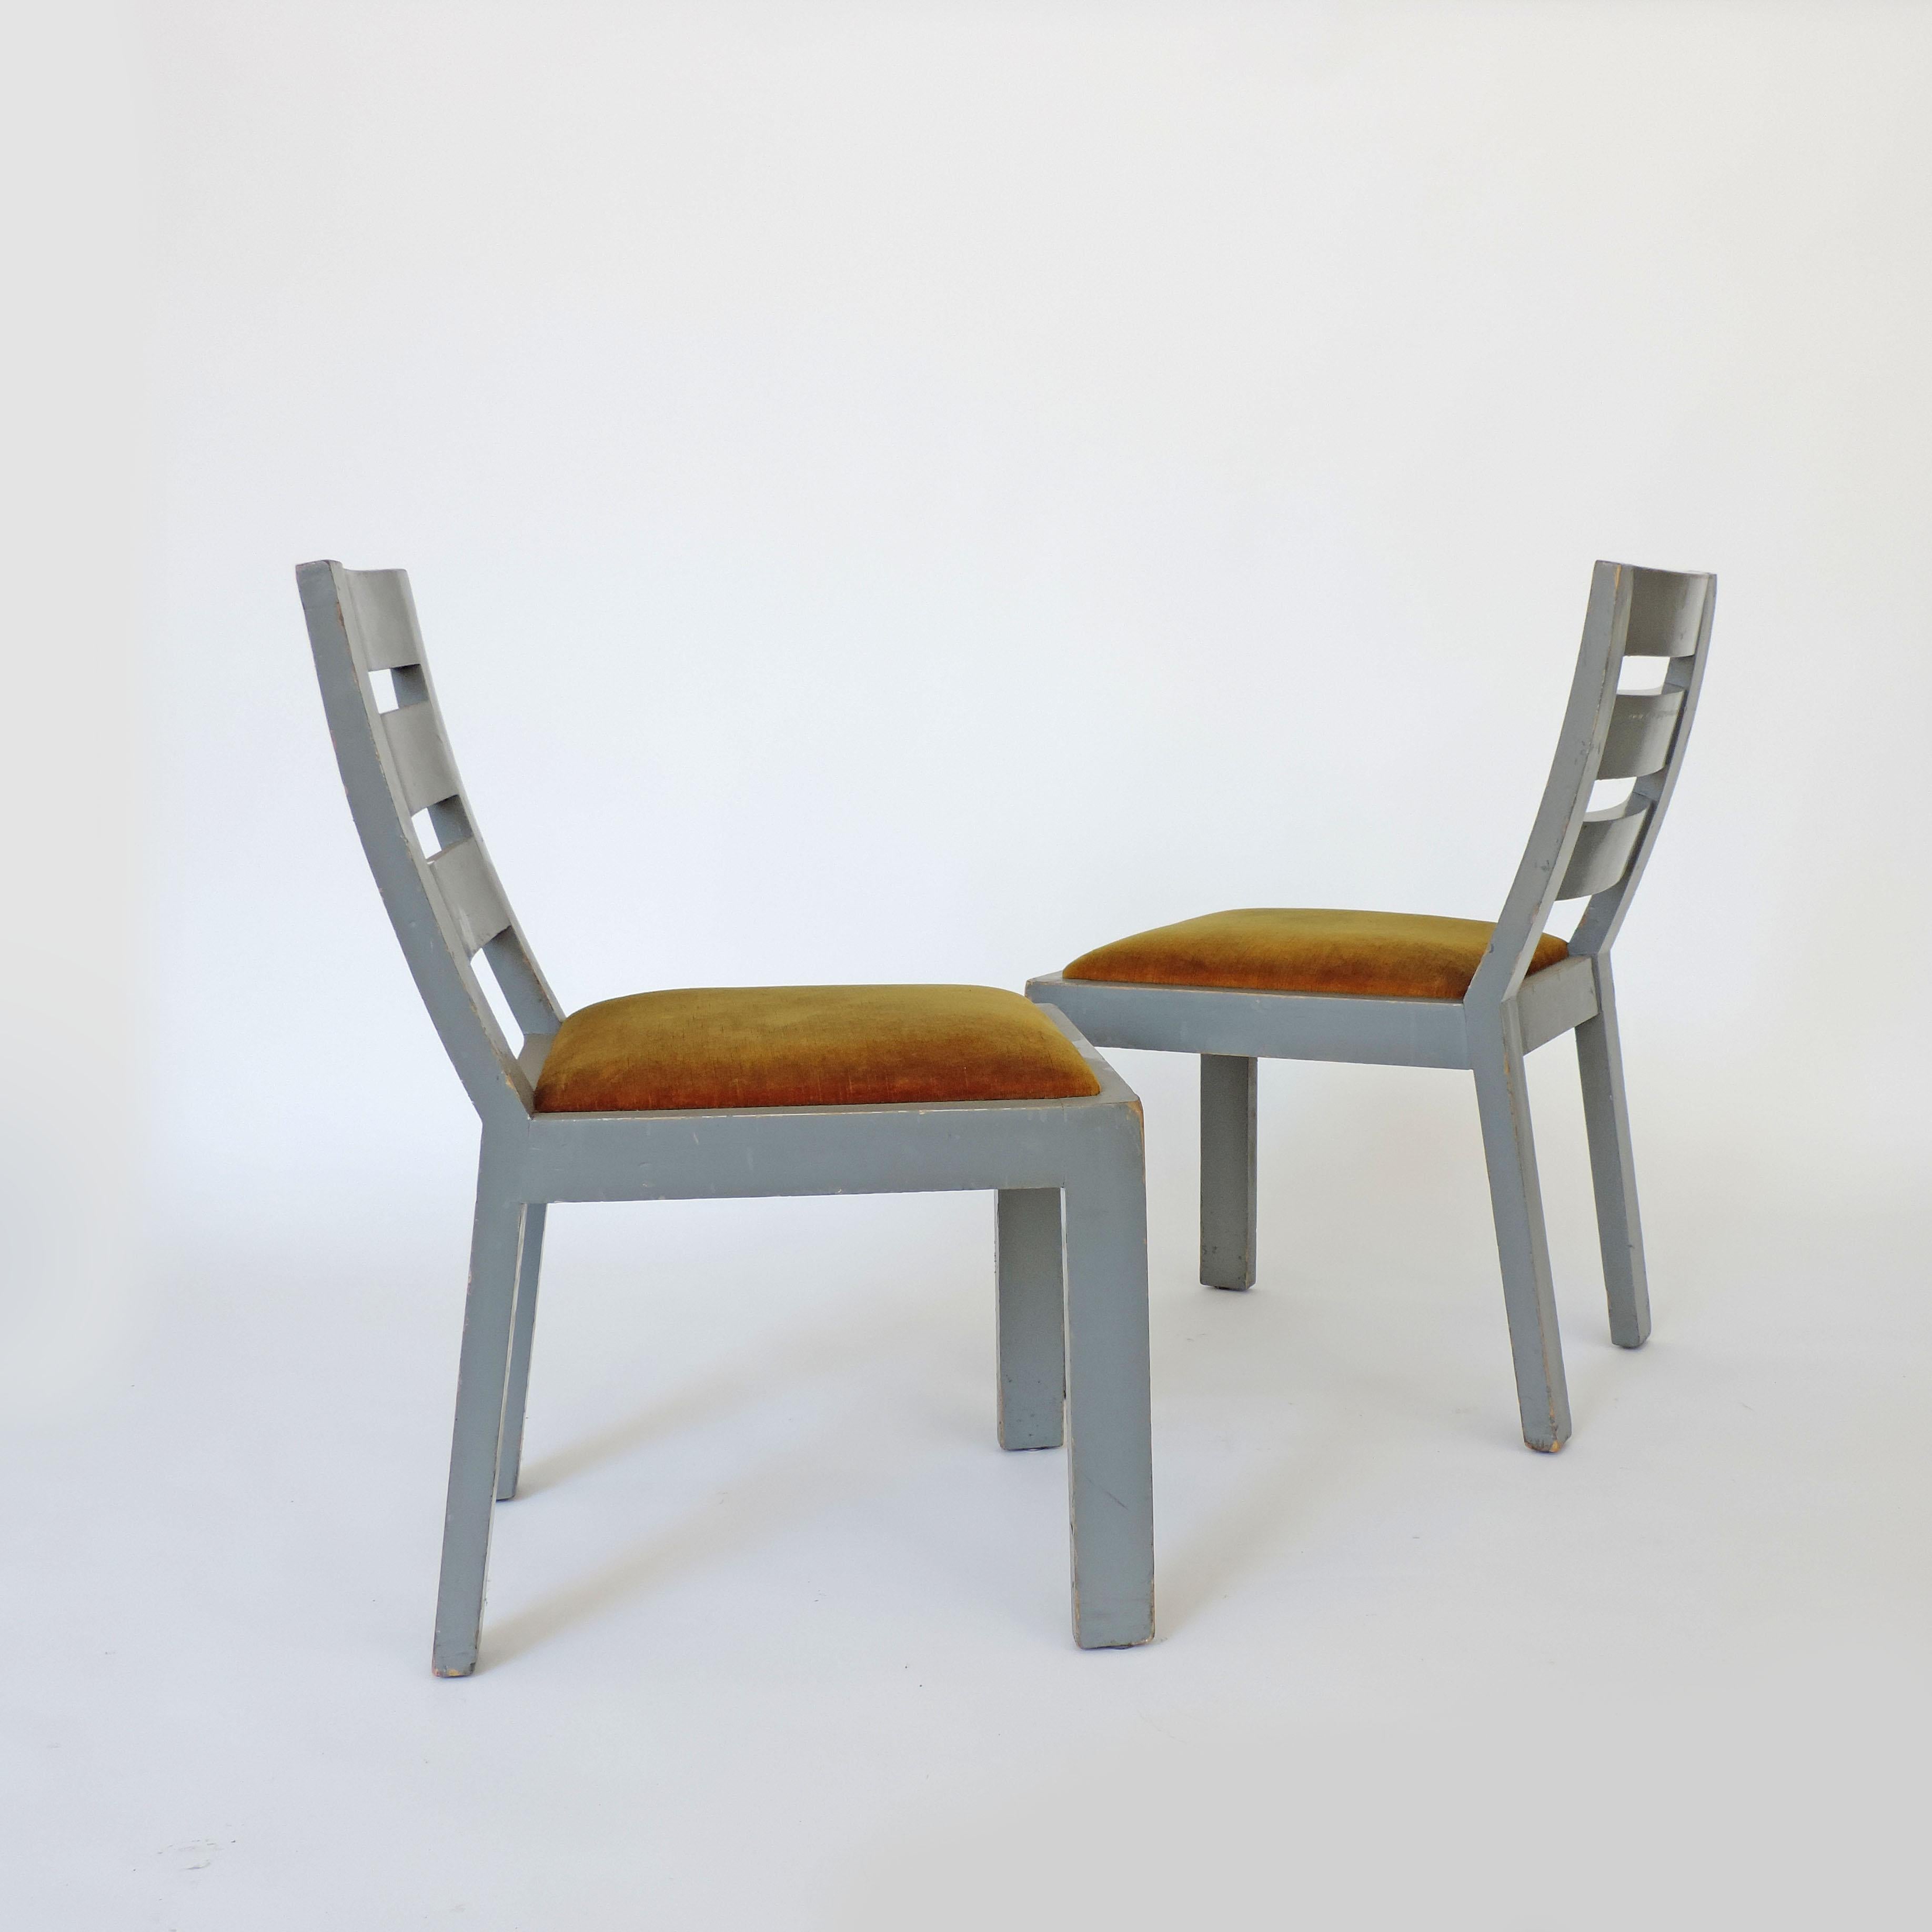 Pair of Italian rationalist movement chairs, Italy, 1930s
Light grey paint and yellow velvet.